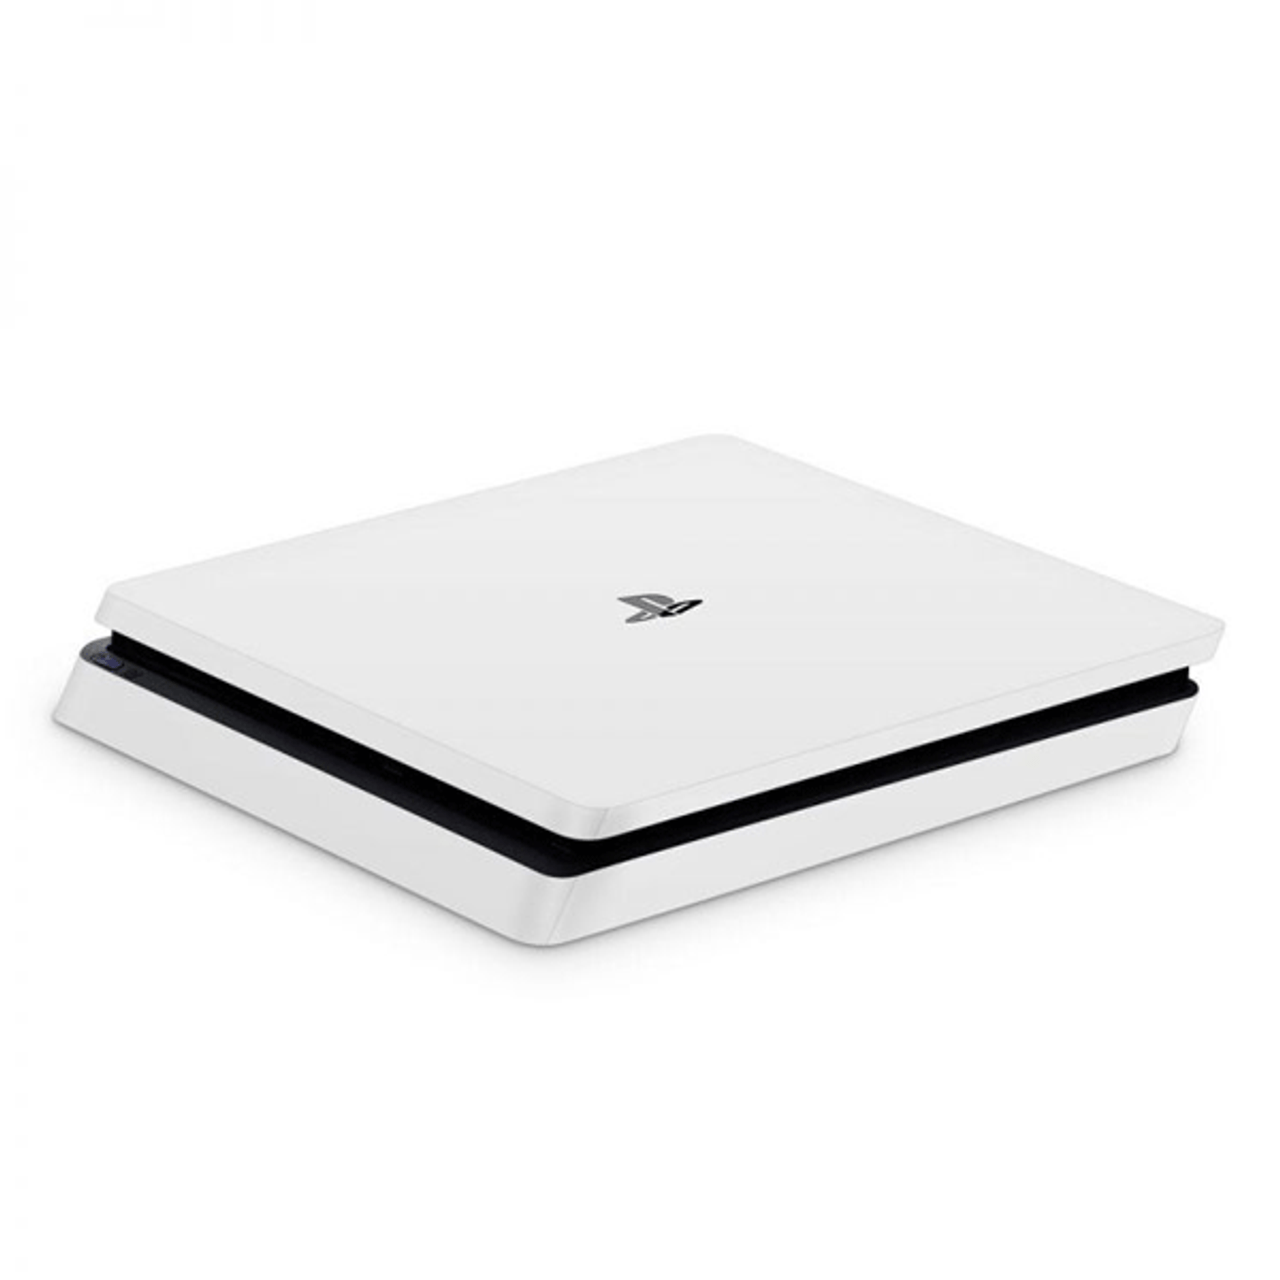 PlayStation 4 (PS4) Slim 500GB White System Player Pak Sony For Sale